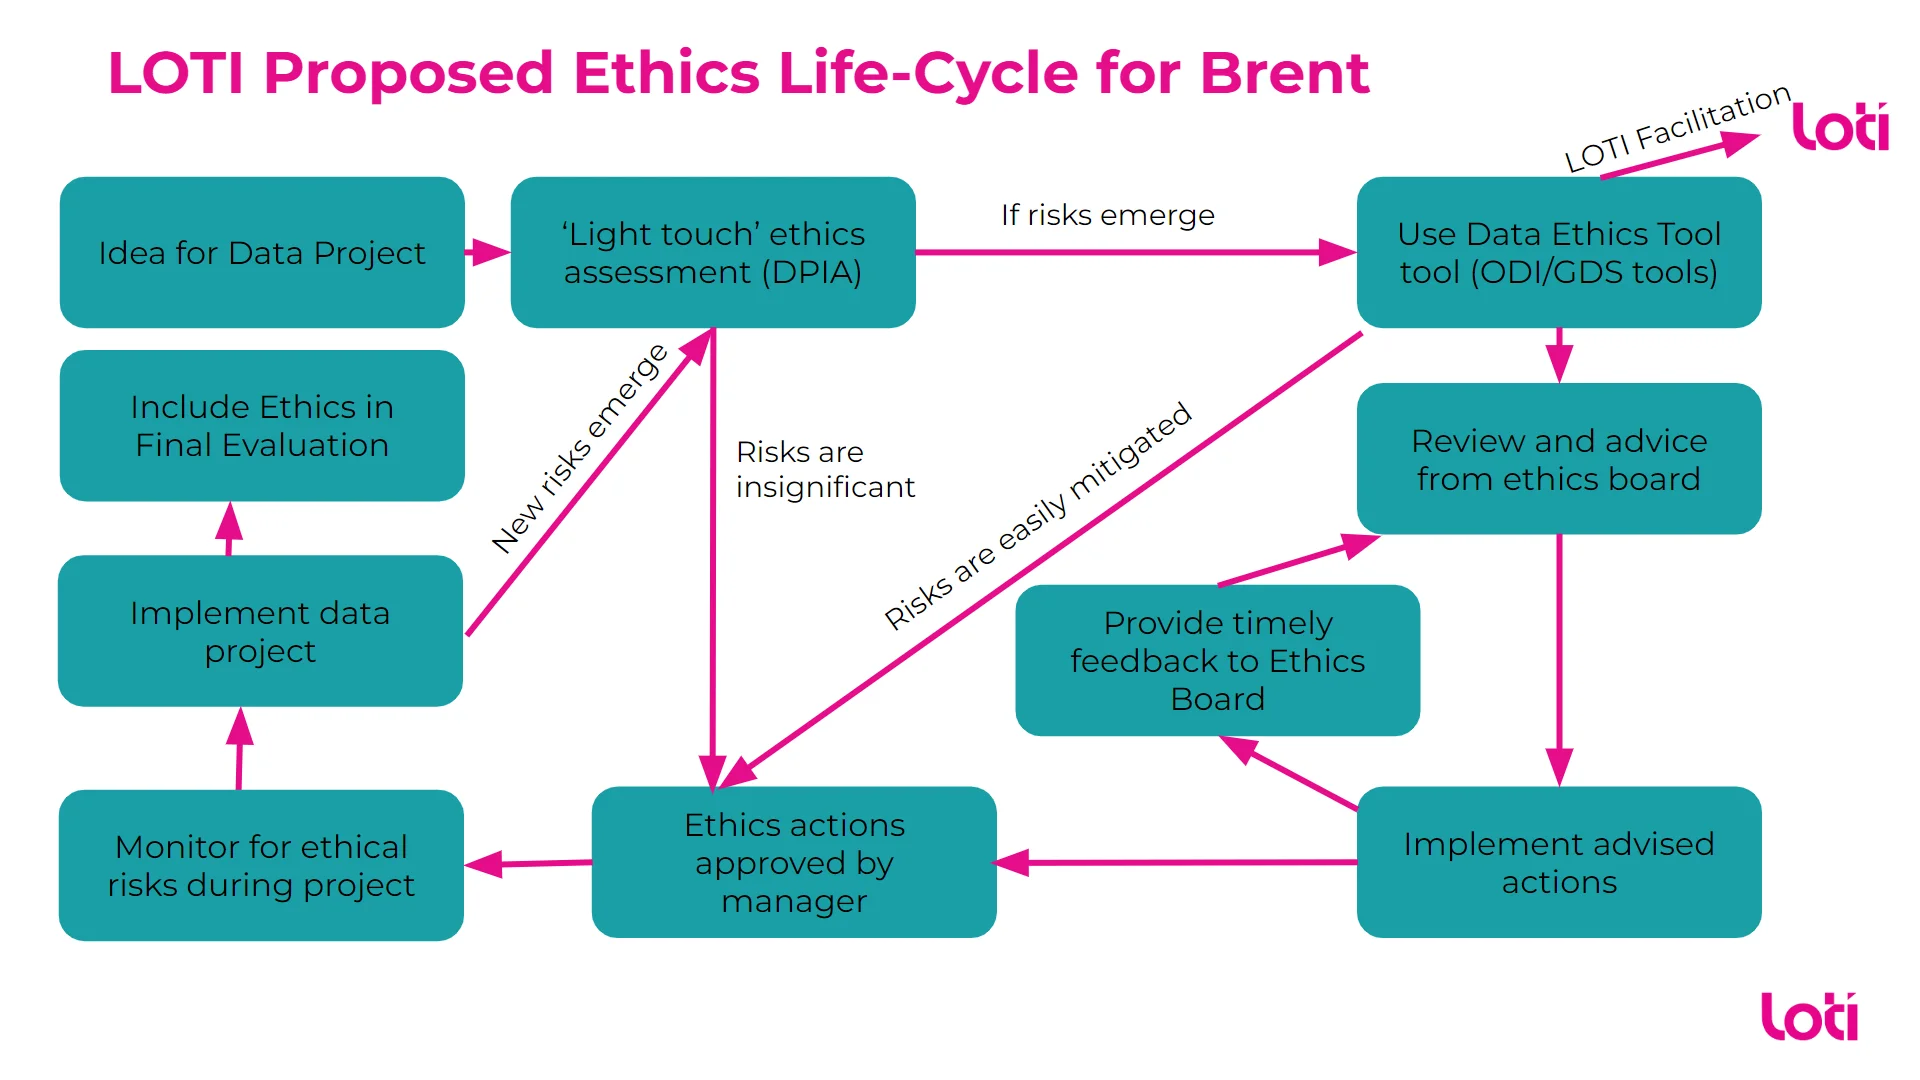 A lifecycle describing the different stages of a project when different types of ethics assessments might be required.